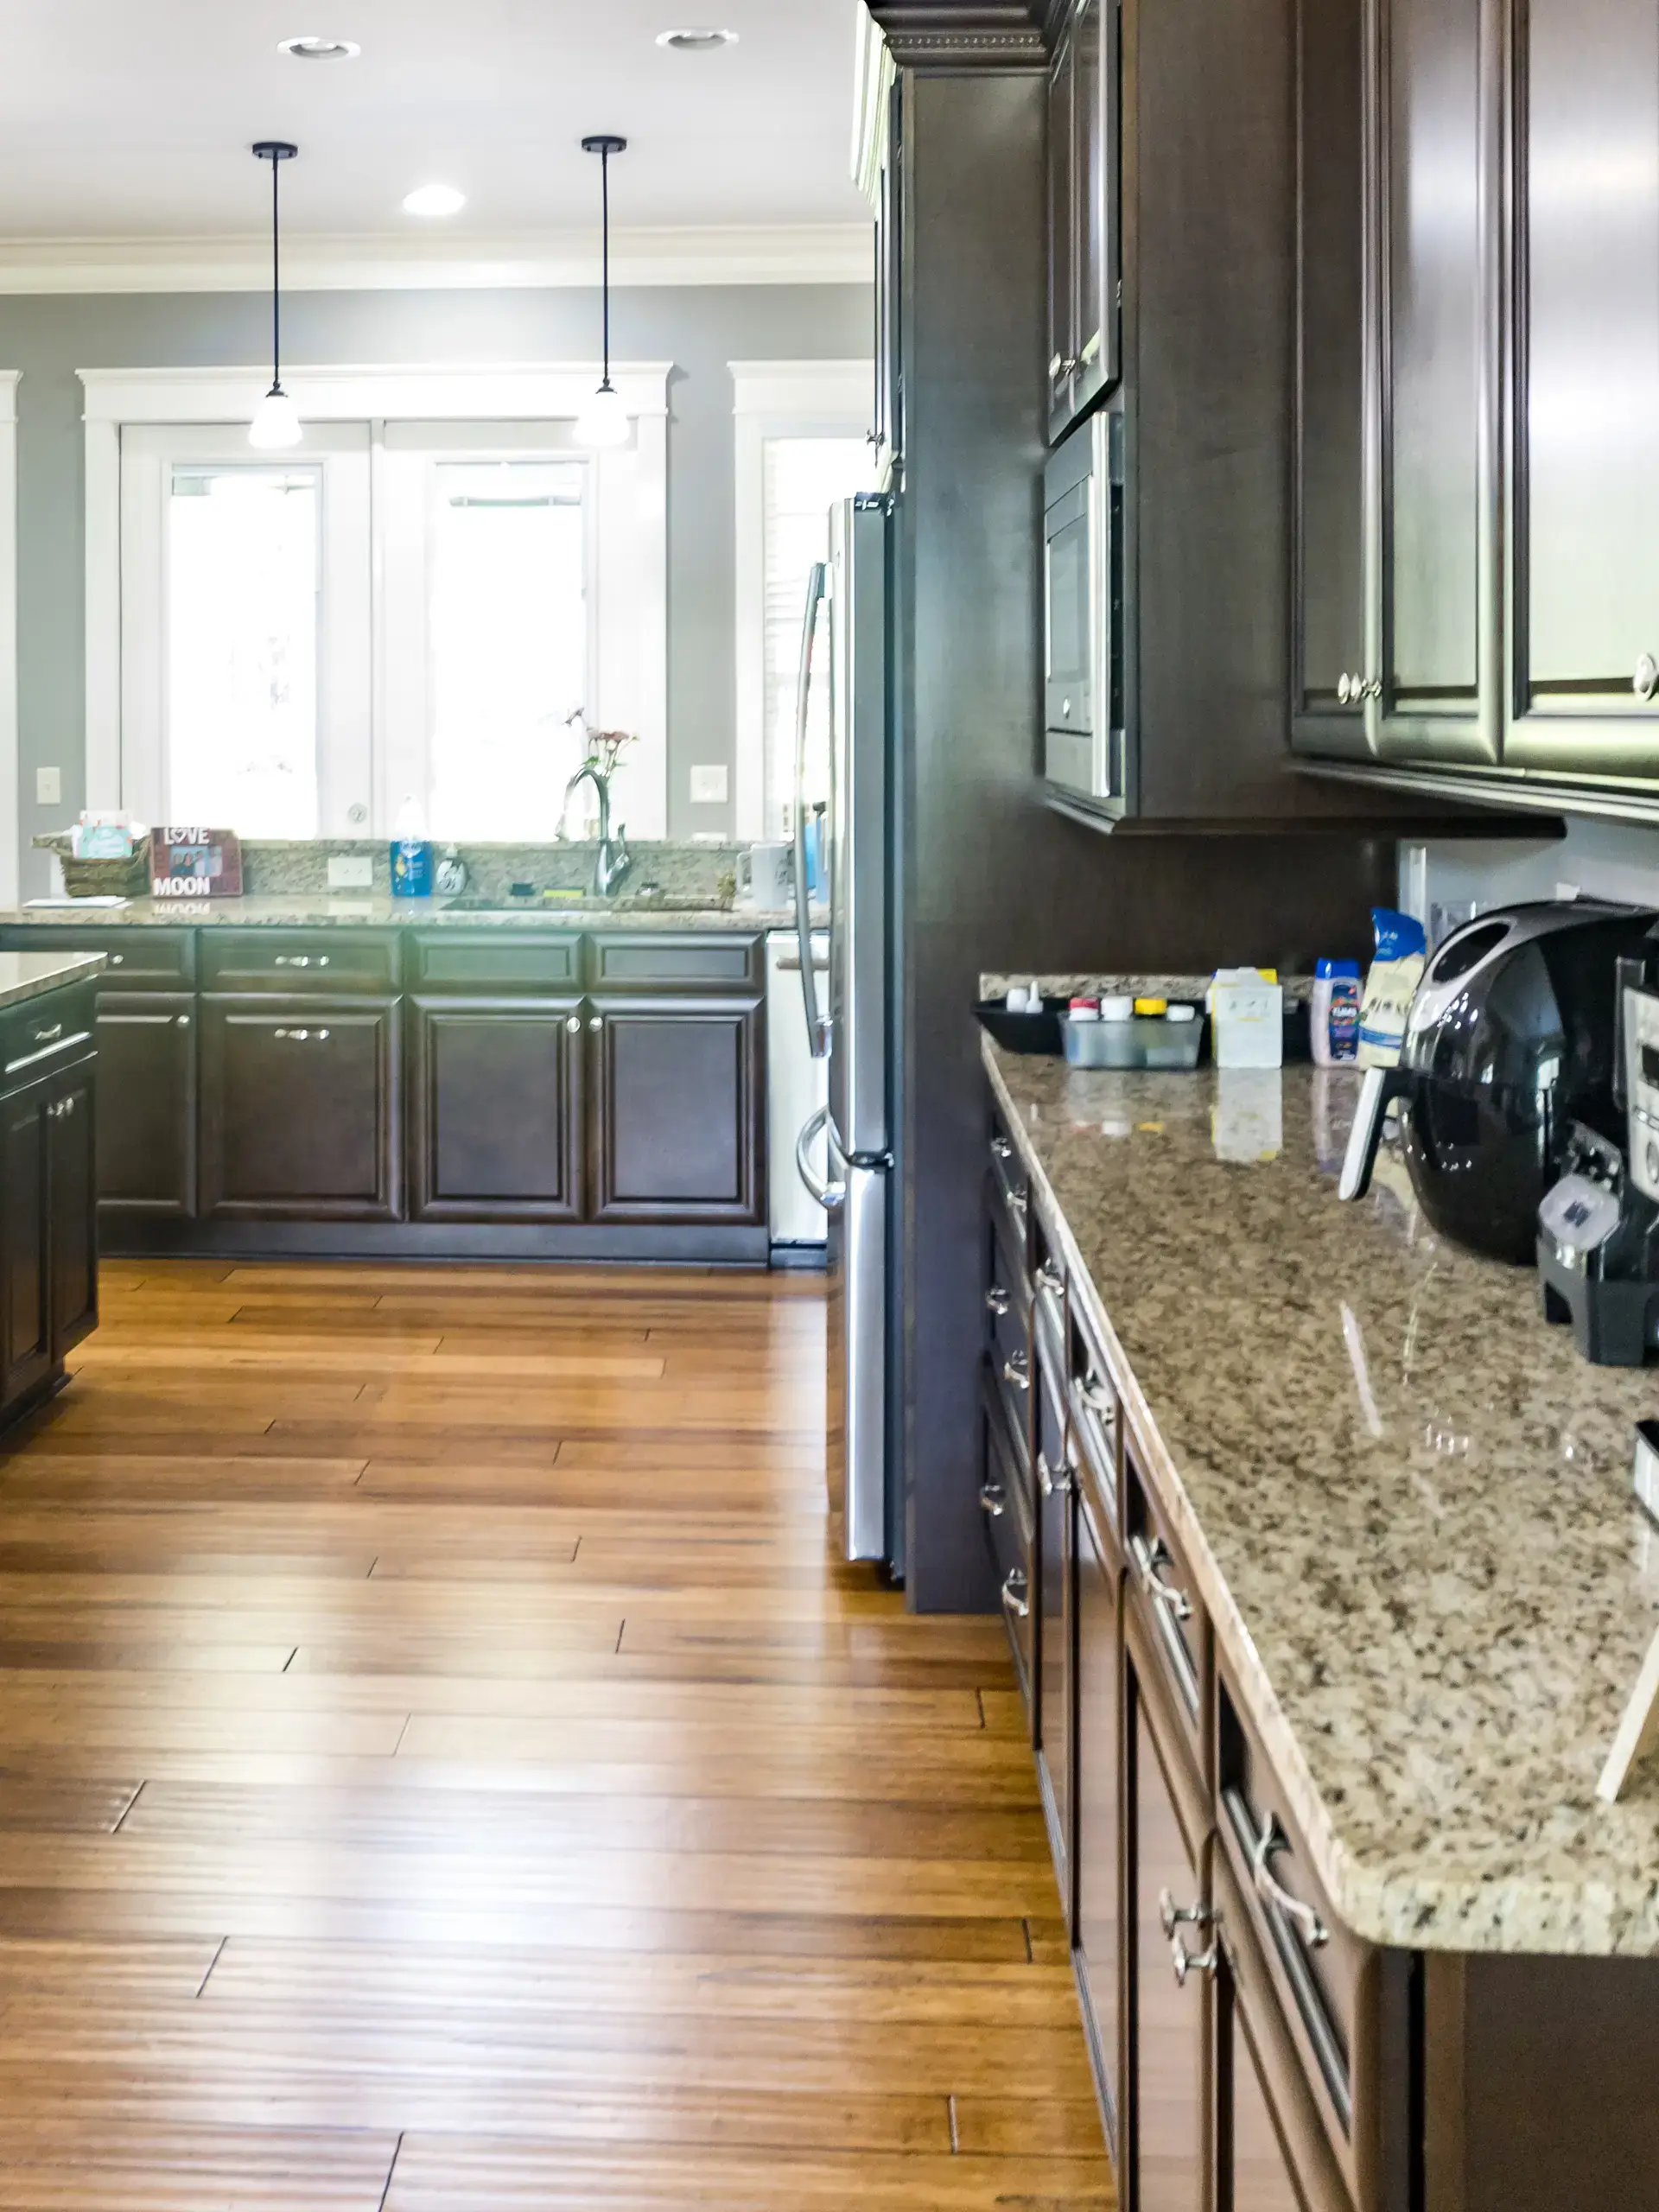 Kitchen Cabinet Refinishing and Repainting Services in Alton, IL